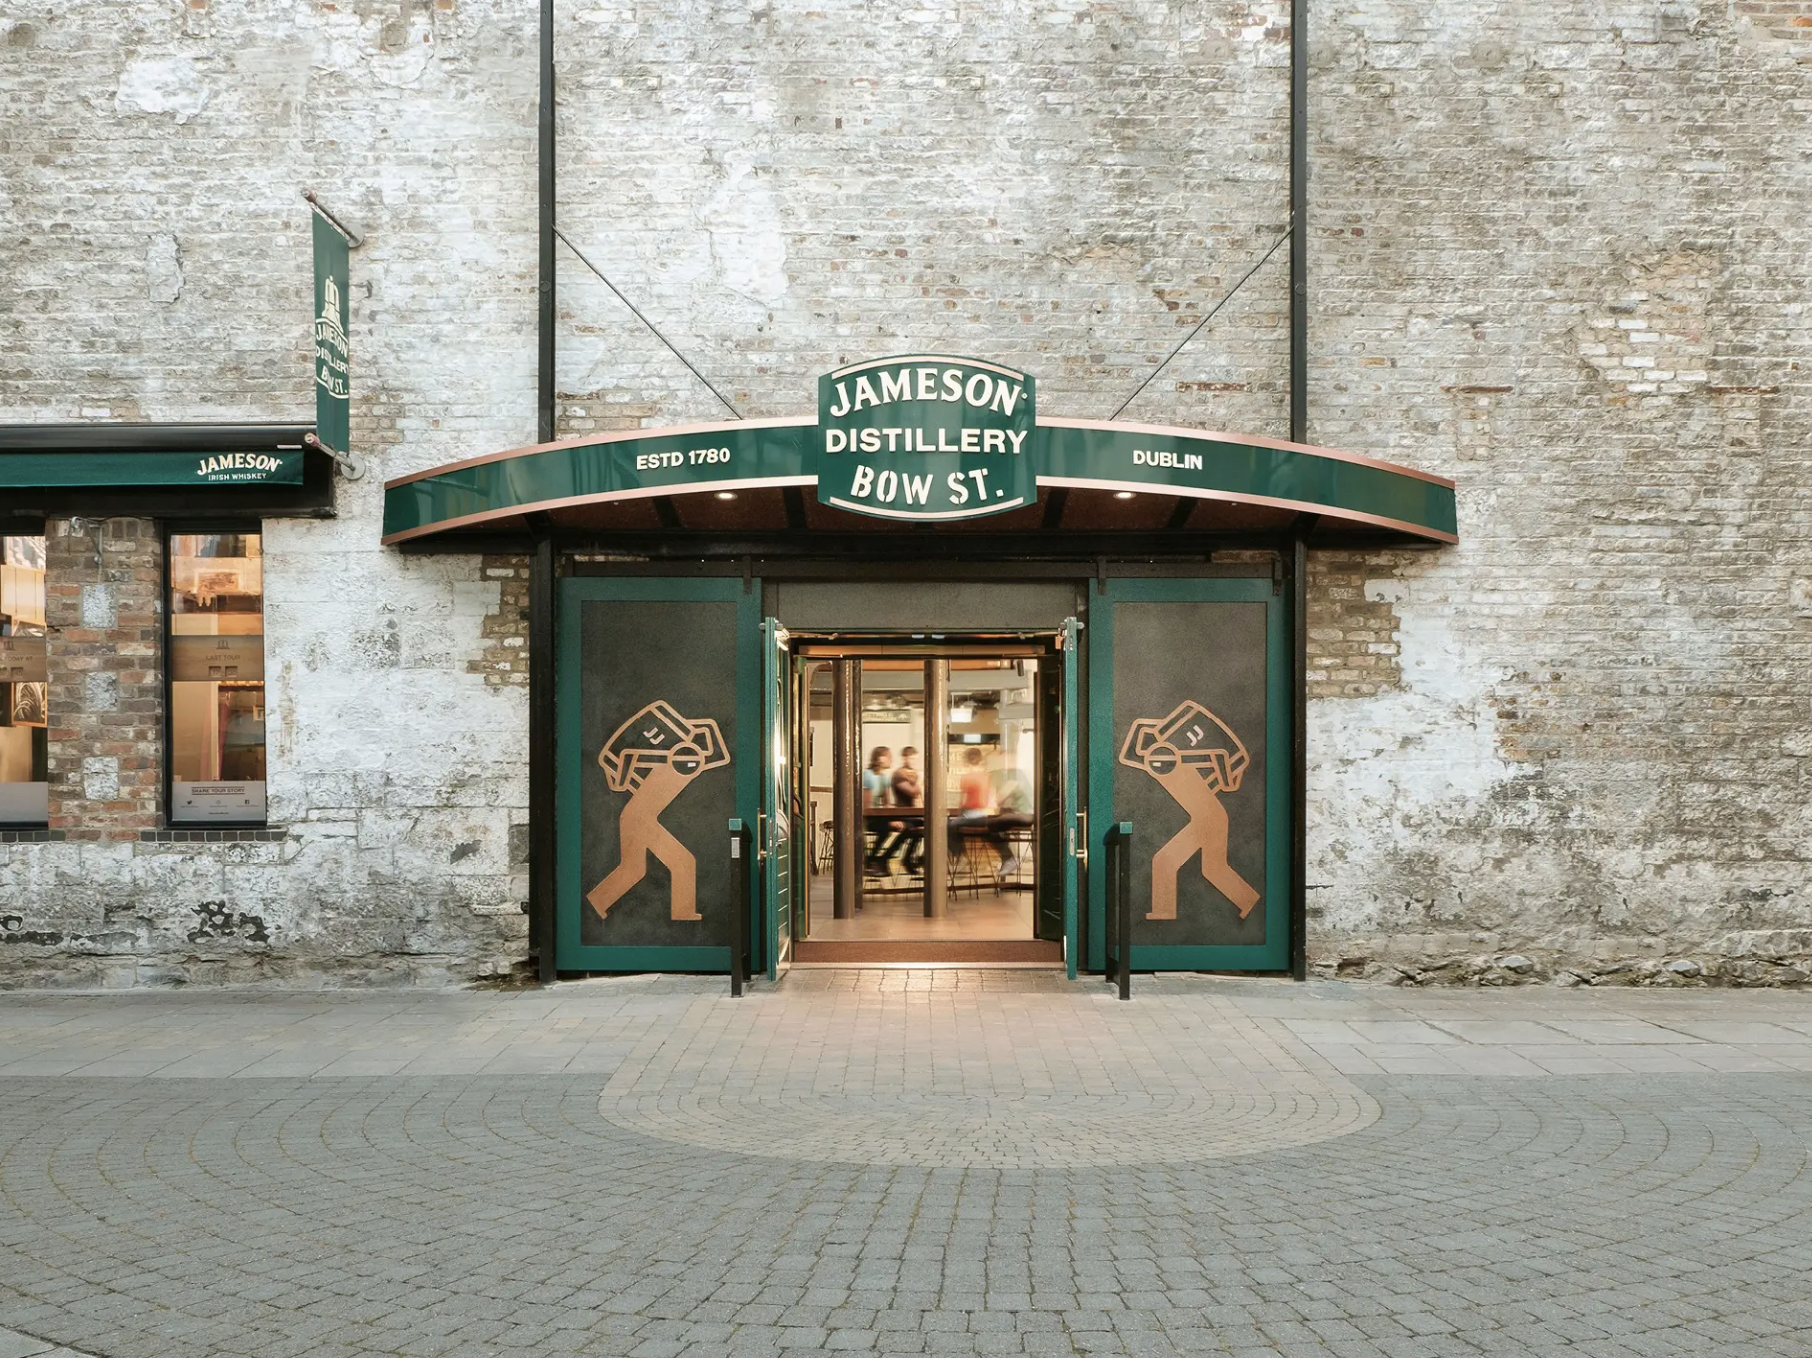 <p>Location: Jameson Distillery Bow St., Bow St., Smithfield Village, Dublin 7, Ireland, D07N9VH</p><p>Contact Info: +353 1 807-2355, jamesonwhiskey.com</p><p>No whiskey lover's bucket list would be complete without a trip to the Jameson Distillery in Dublin, Ireland. The historic Bow St. location, where Jameson was distilled from 1780 until 1971, has been beautifully restored and now serves as a visitor center offering a range of interactive experiences. Choose from a guided tour, a whiskey-blending masterclass, or a whiskey cocktail-making class to deepen your appreciation for the iconic Irish whiskey brand. Be sure to visit the on-site bar, where you can enjoy a variety of Jameson expressions, including some exclusive to the Bow St. distillery.</p>